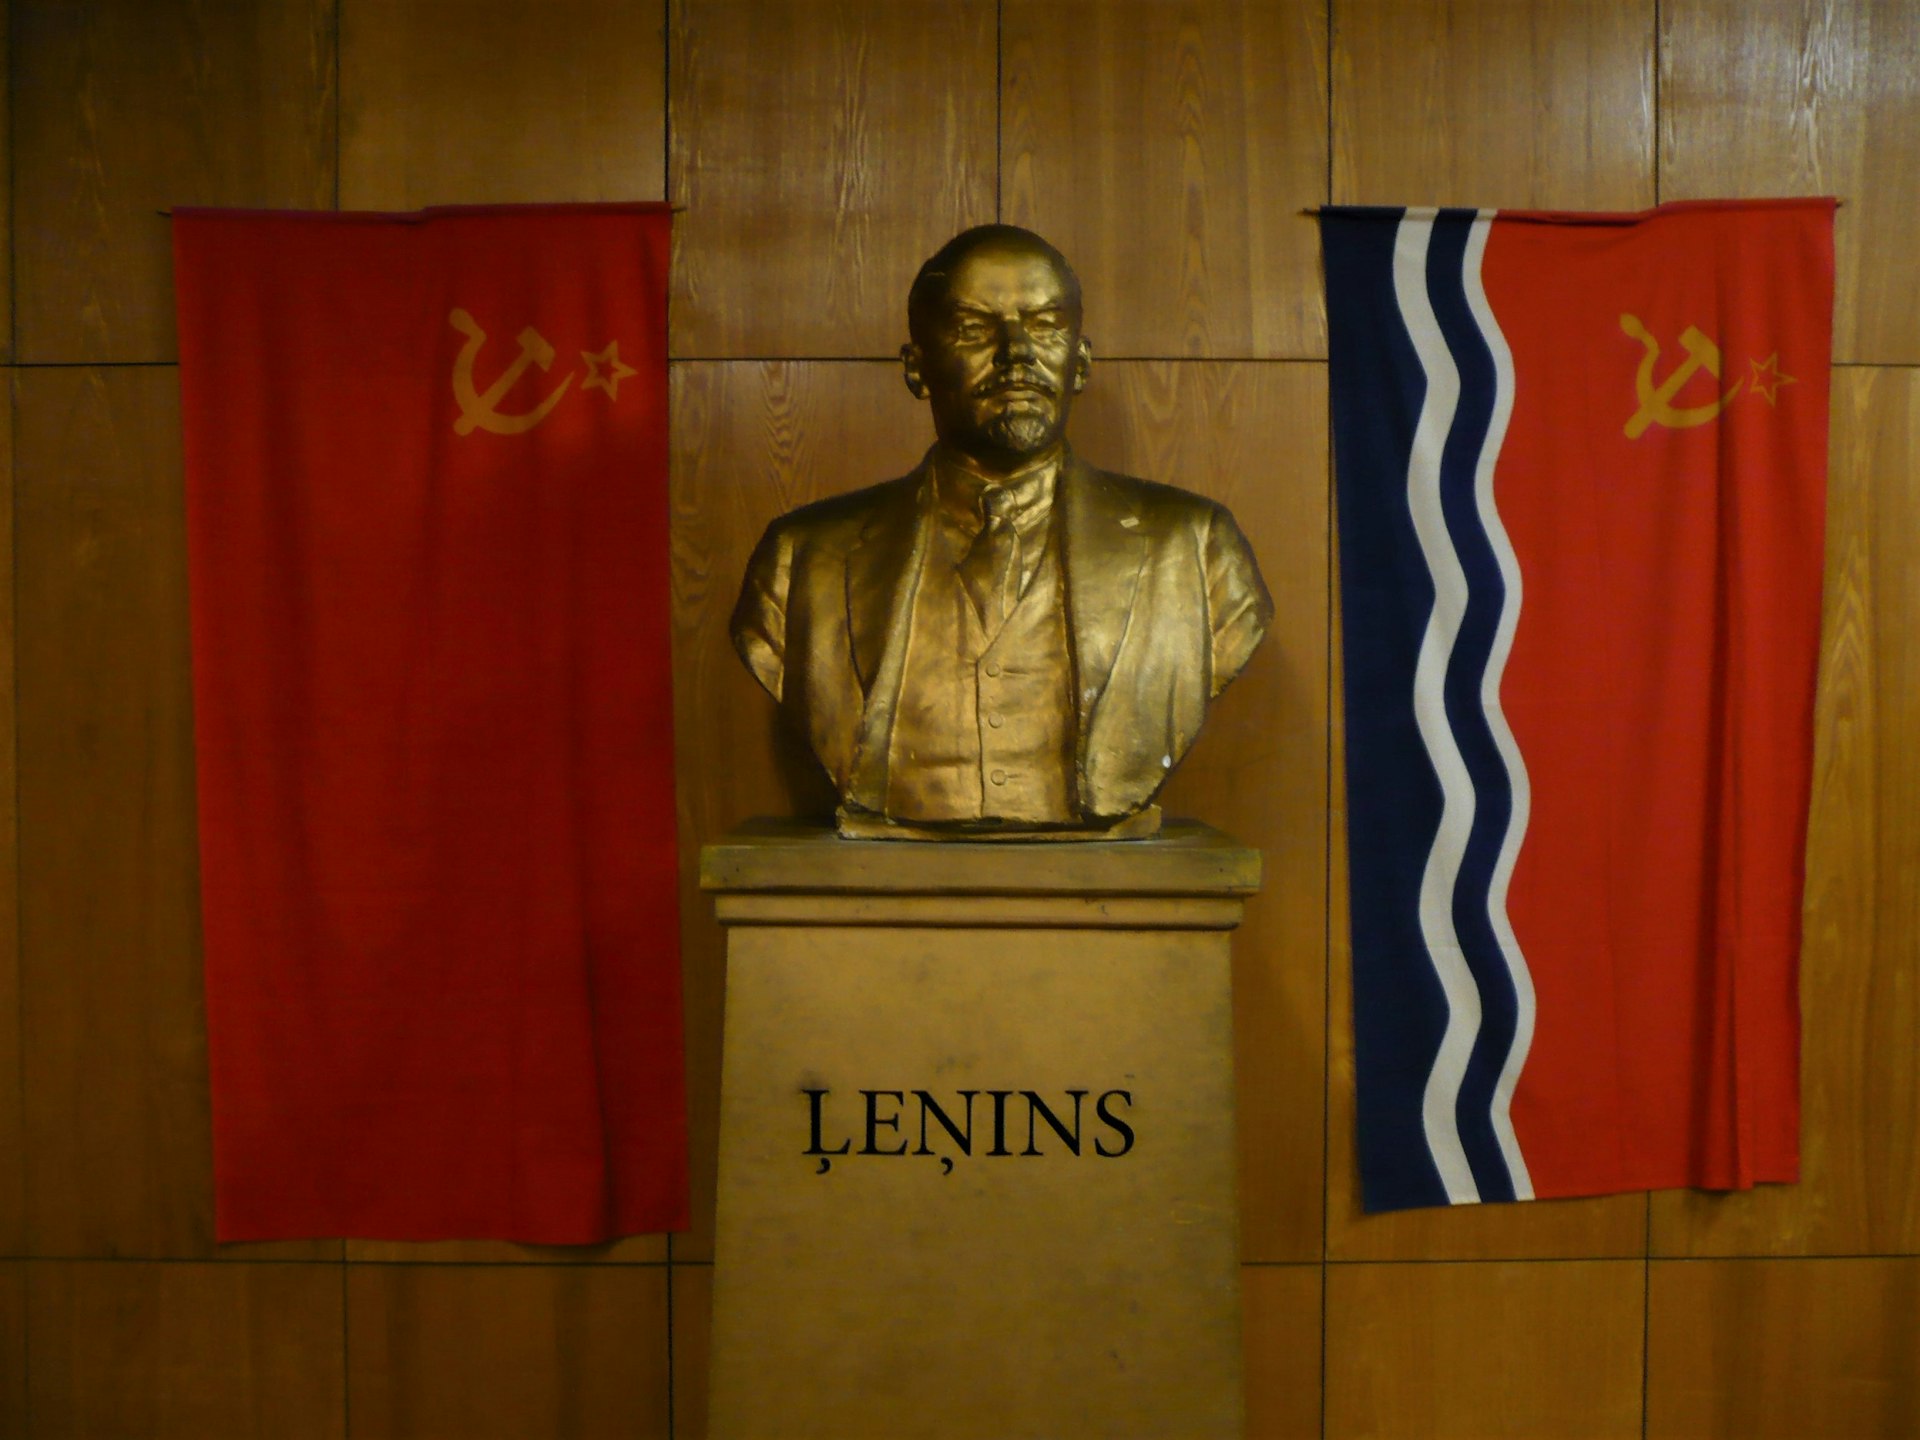 A bust of Lenin stands between two Soviet flags